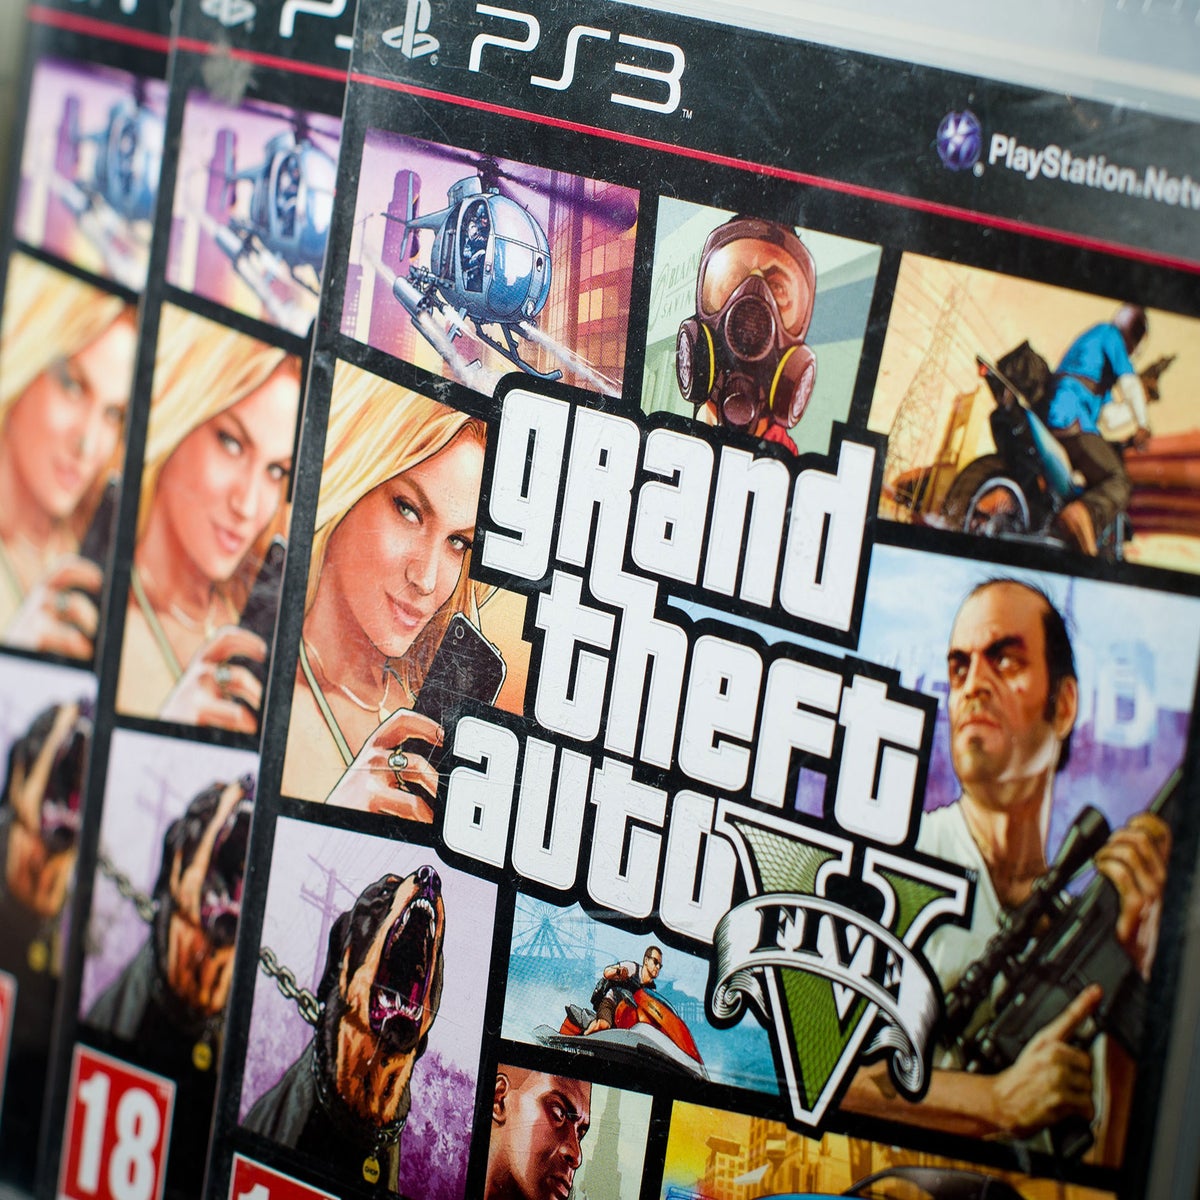 Sisterchudaivideo - Boy, 12, raped six-year-old sister 'to recreate Grand Theft Auto scene',  court told | The Independent | The Independent